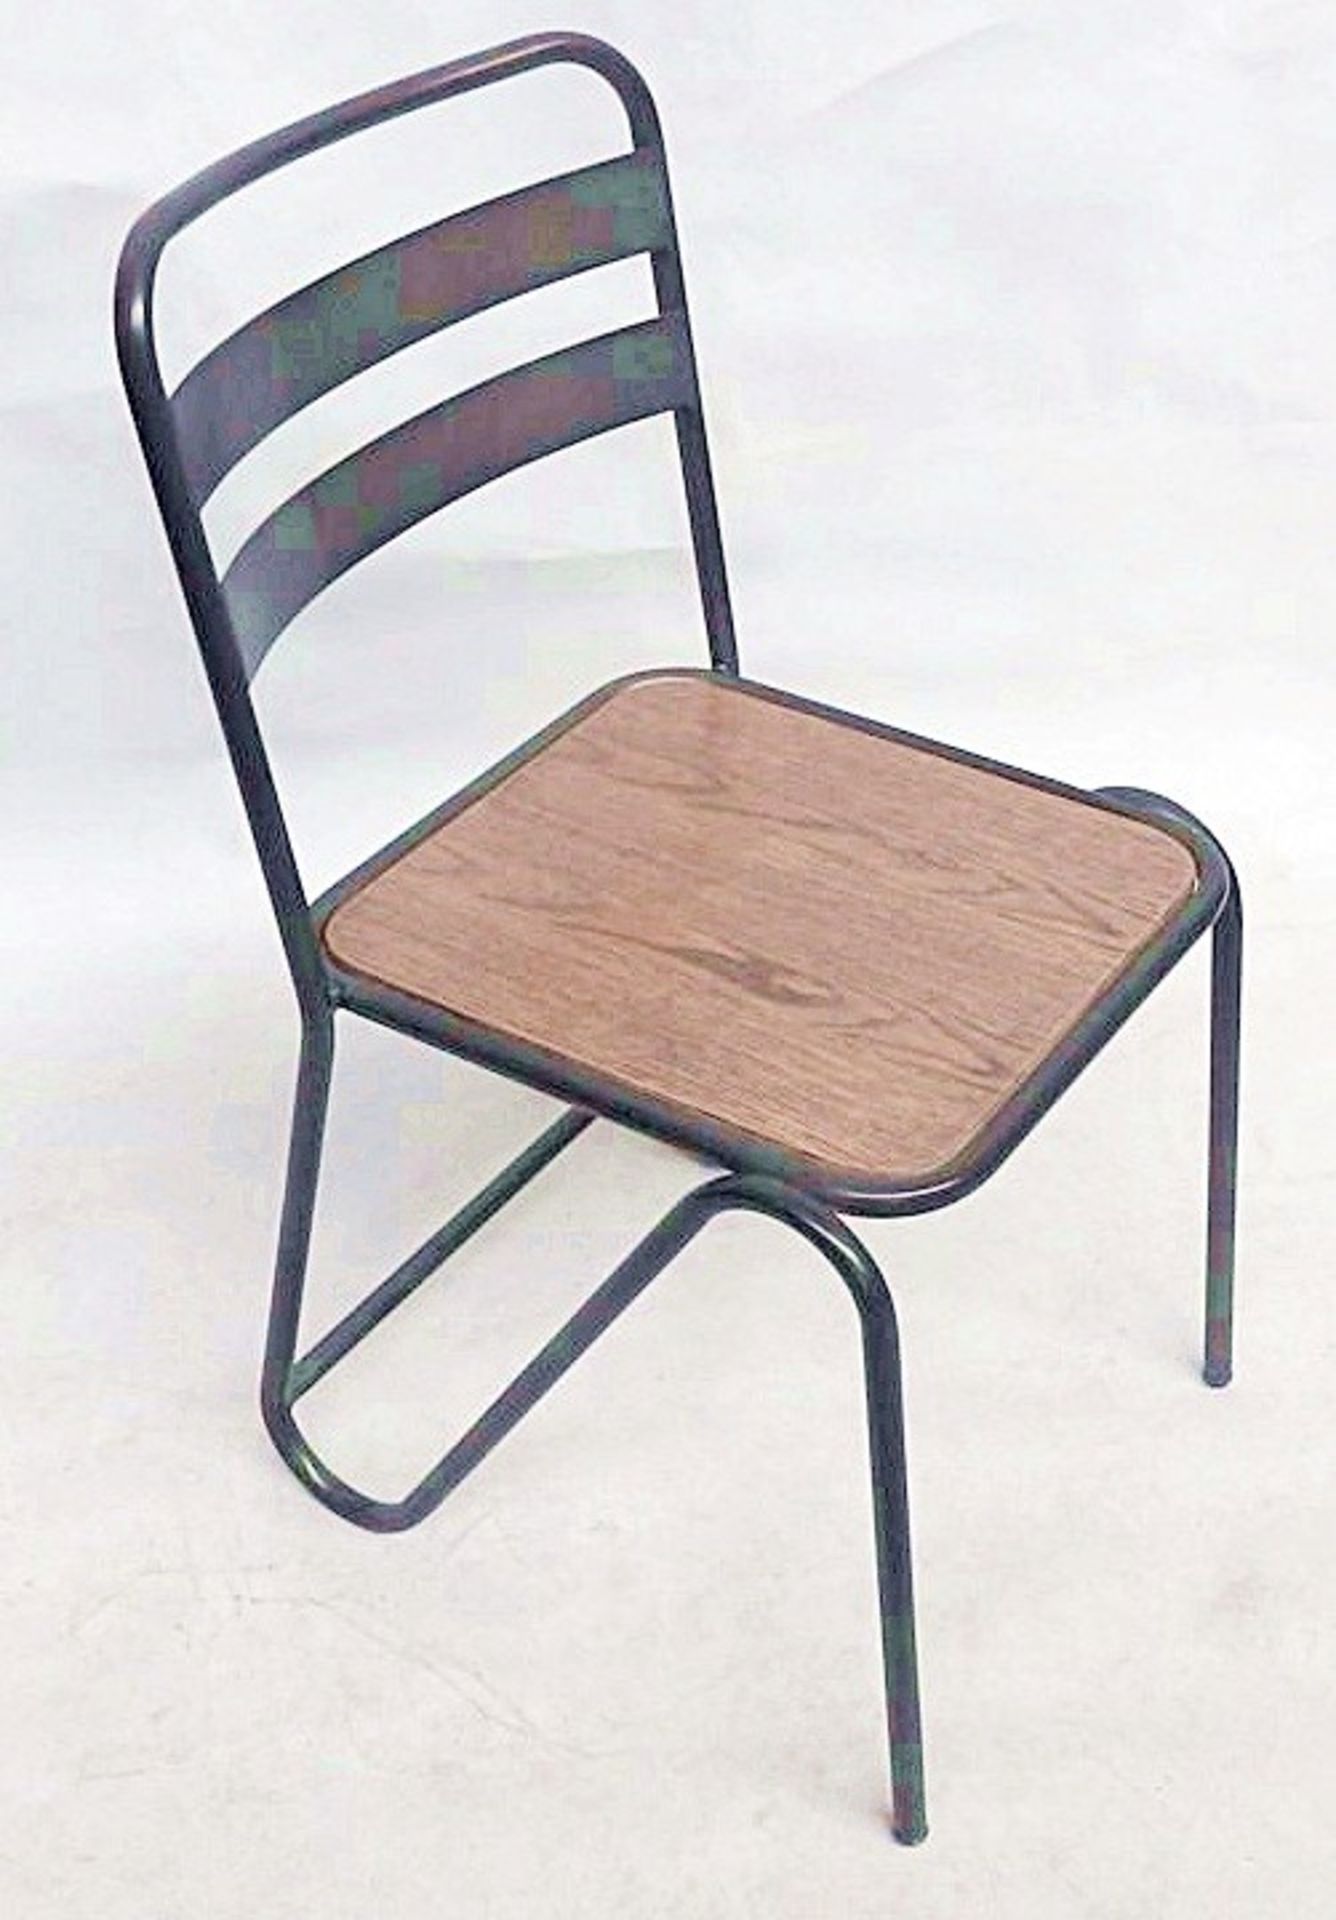 1 x Stylish And Modern Chair With Metal Tube Frame and Wooden Seat - Colour: Gun Metal - Dimensions: